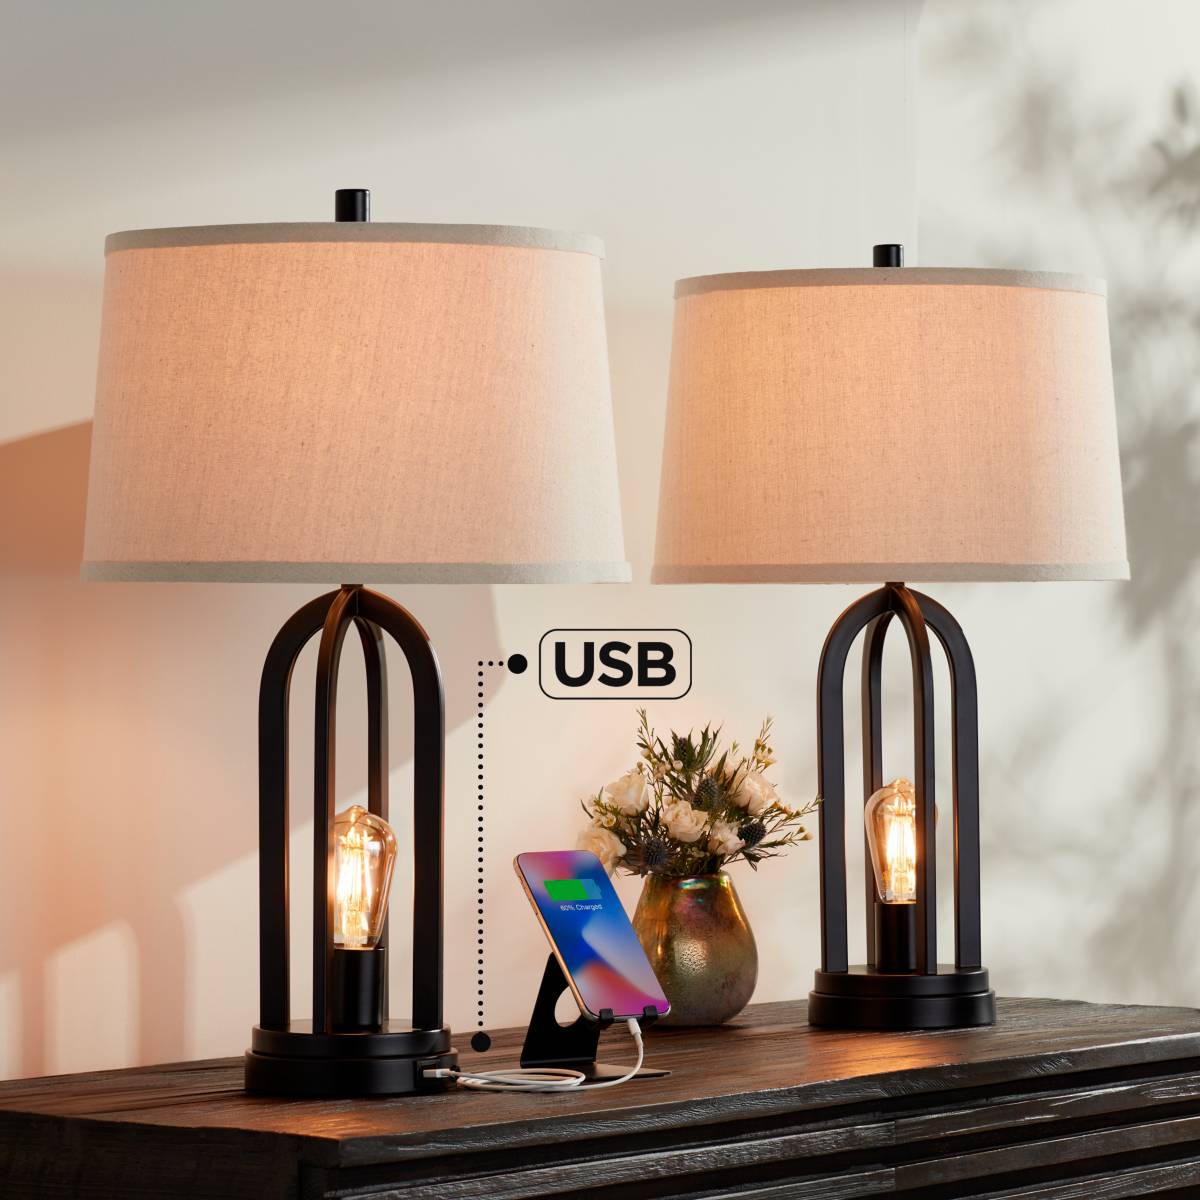 Usb Table Lamps Featuring Built In, Living Room Table Lamp With Usb Port